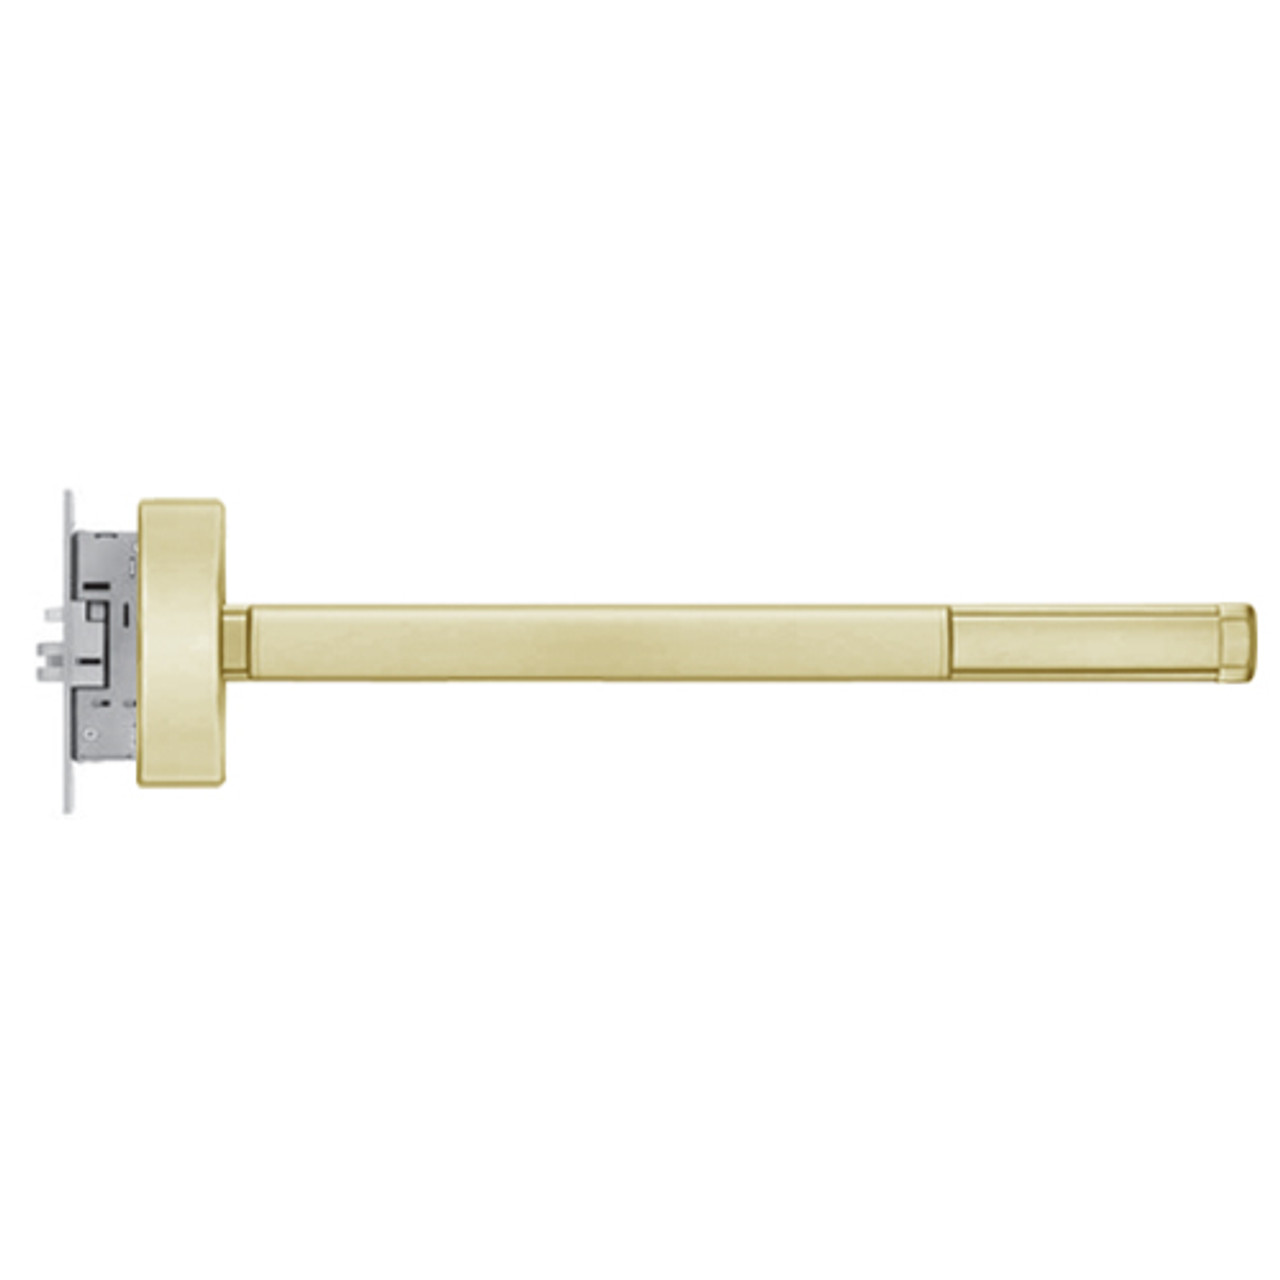 2303CD-RHR-606-48 PHI 2300 Series Non Fire Rated Apex Mortise Exit Device Prepped for Key Retracts Latchbolt with Cylinder Dogging in Satin Brass Finish